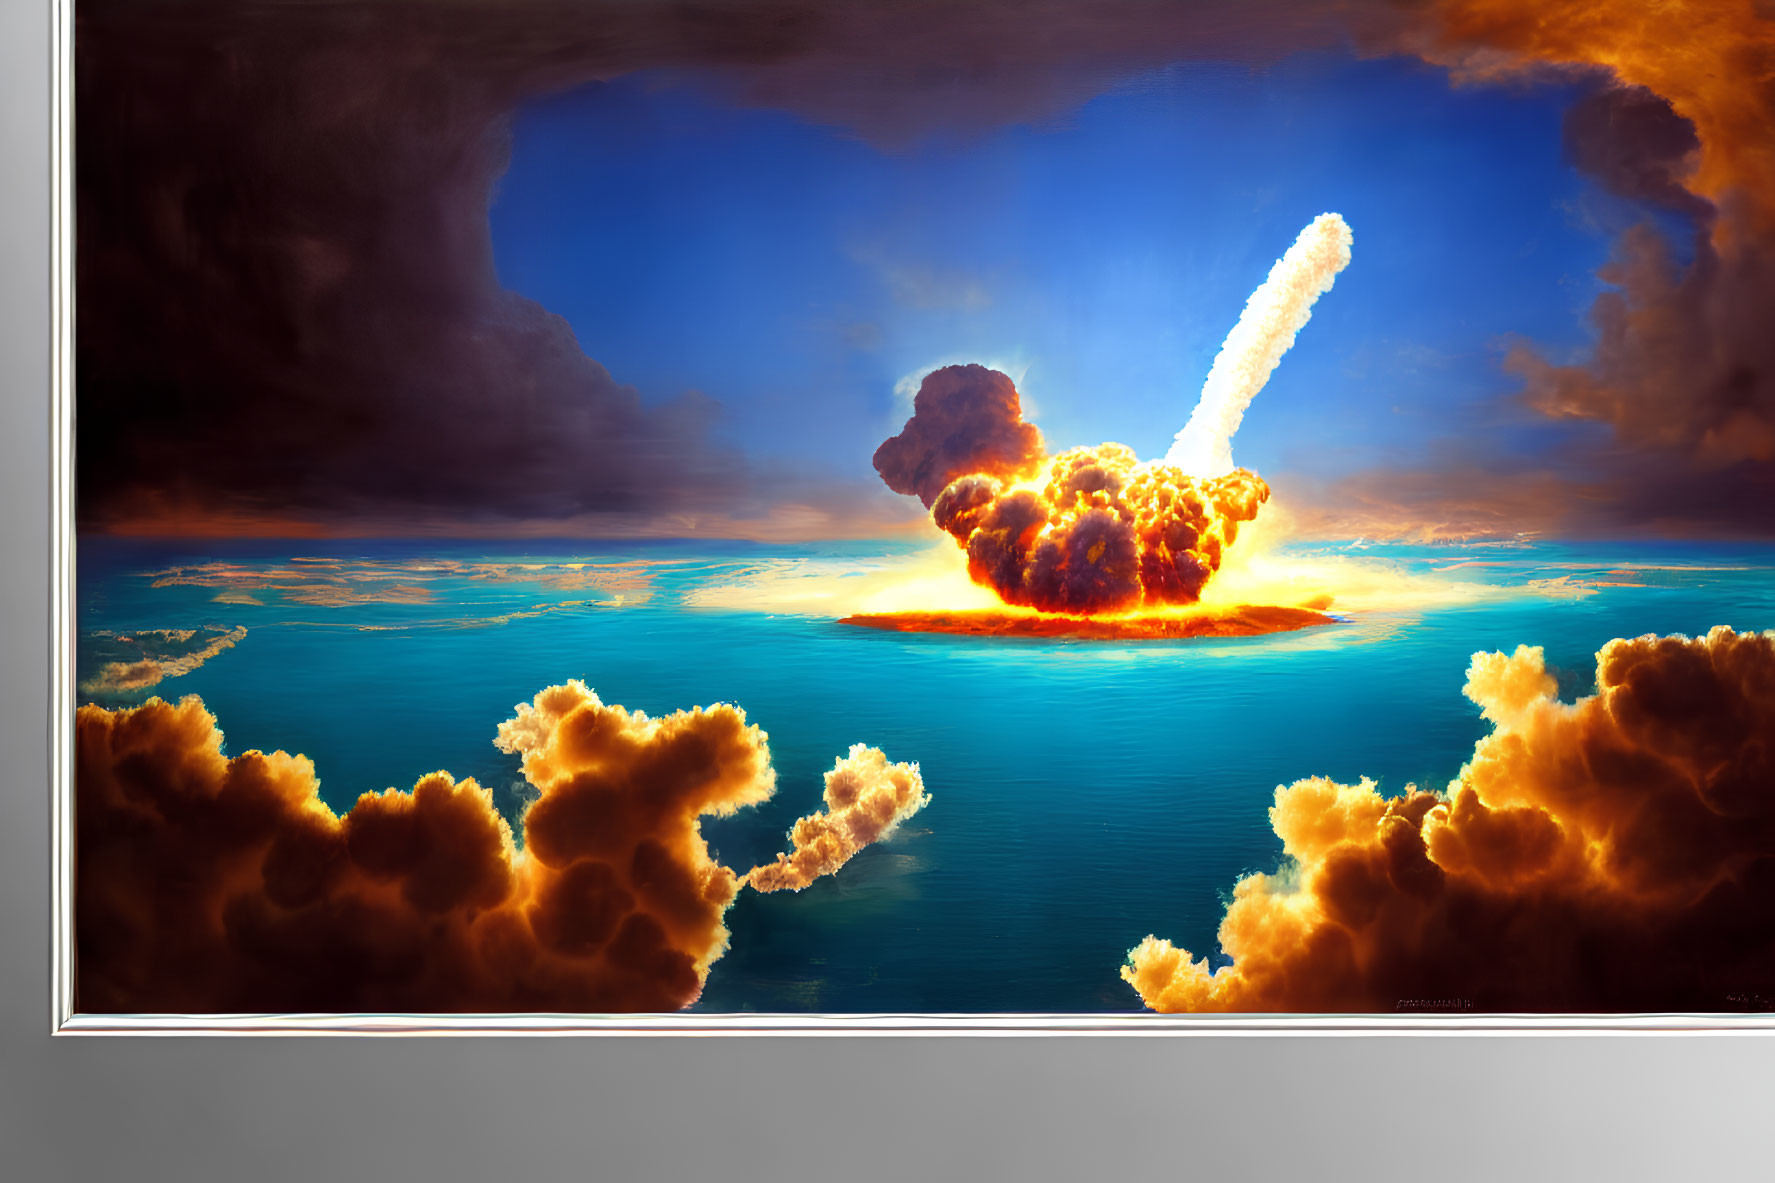 Artwork: Massive Explosion with Mushroom Cloud Over Water